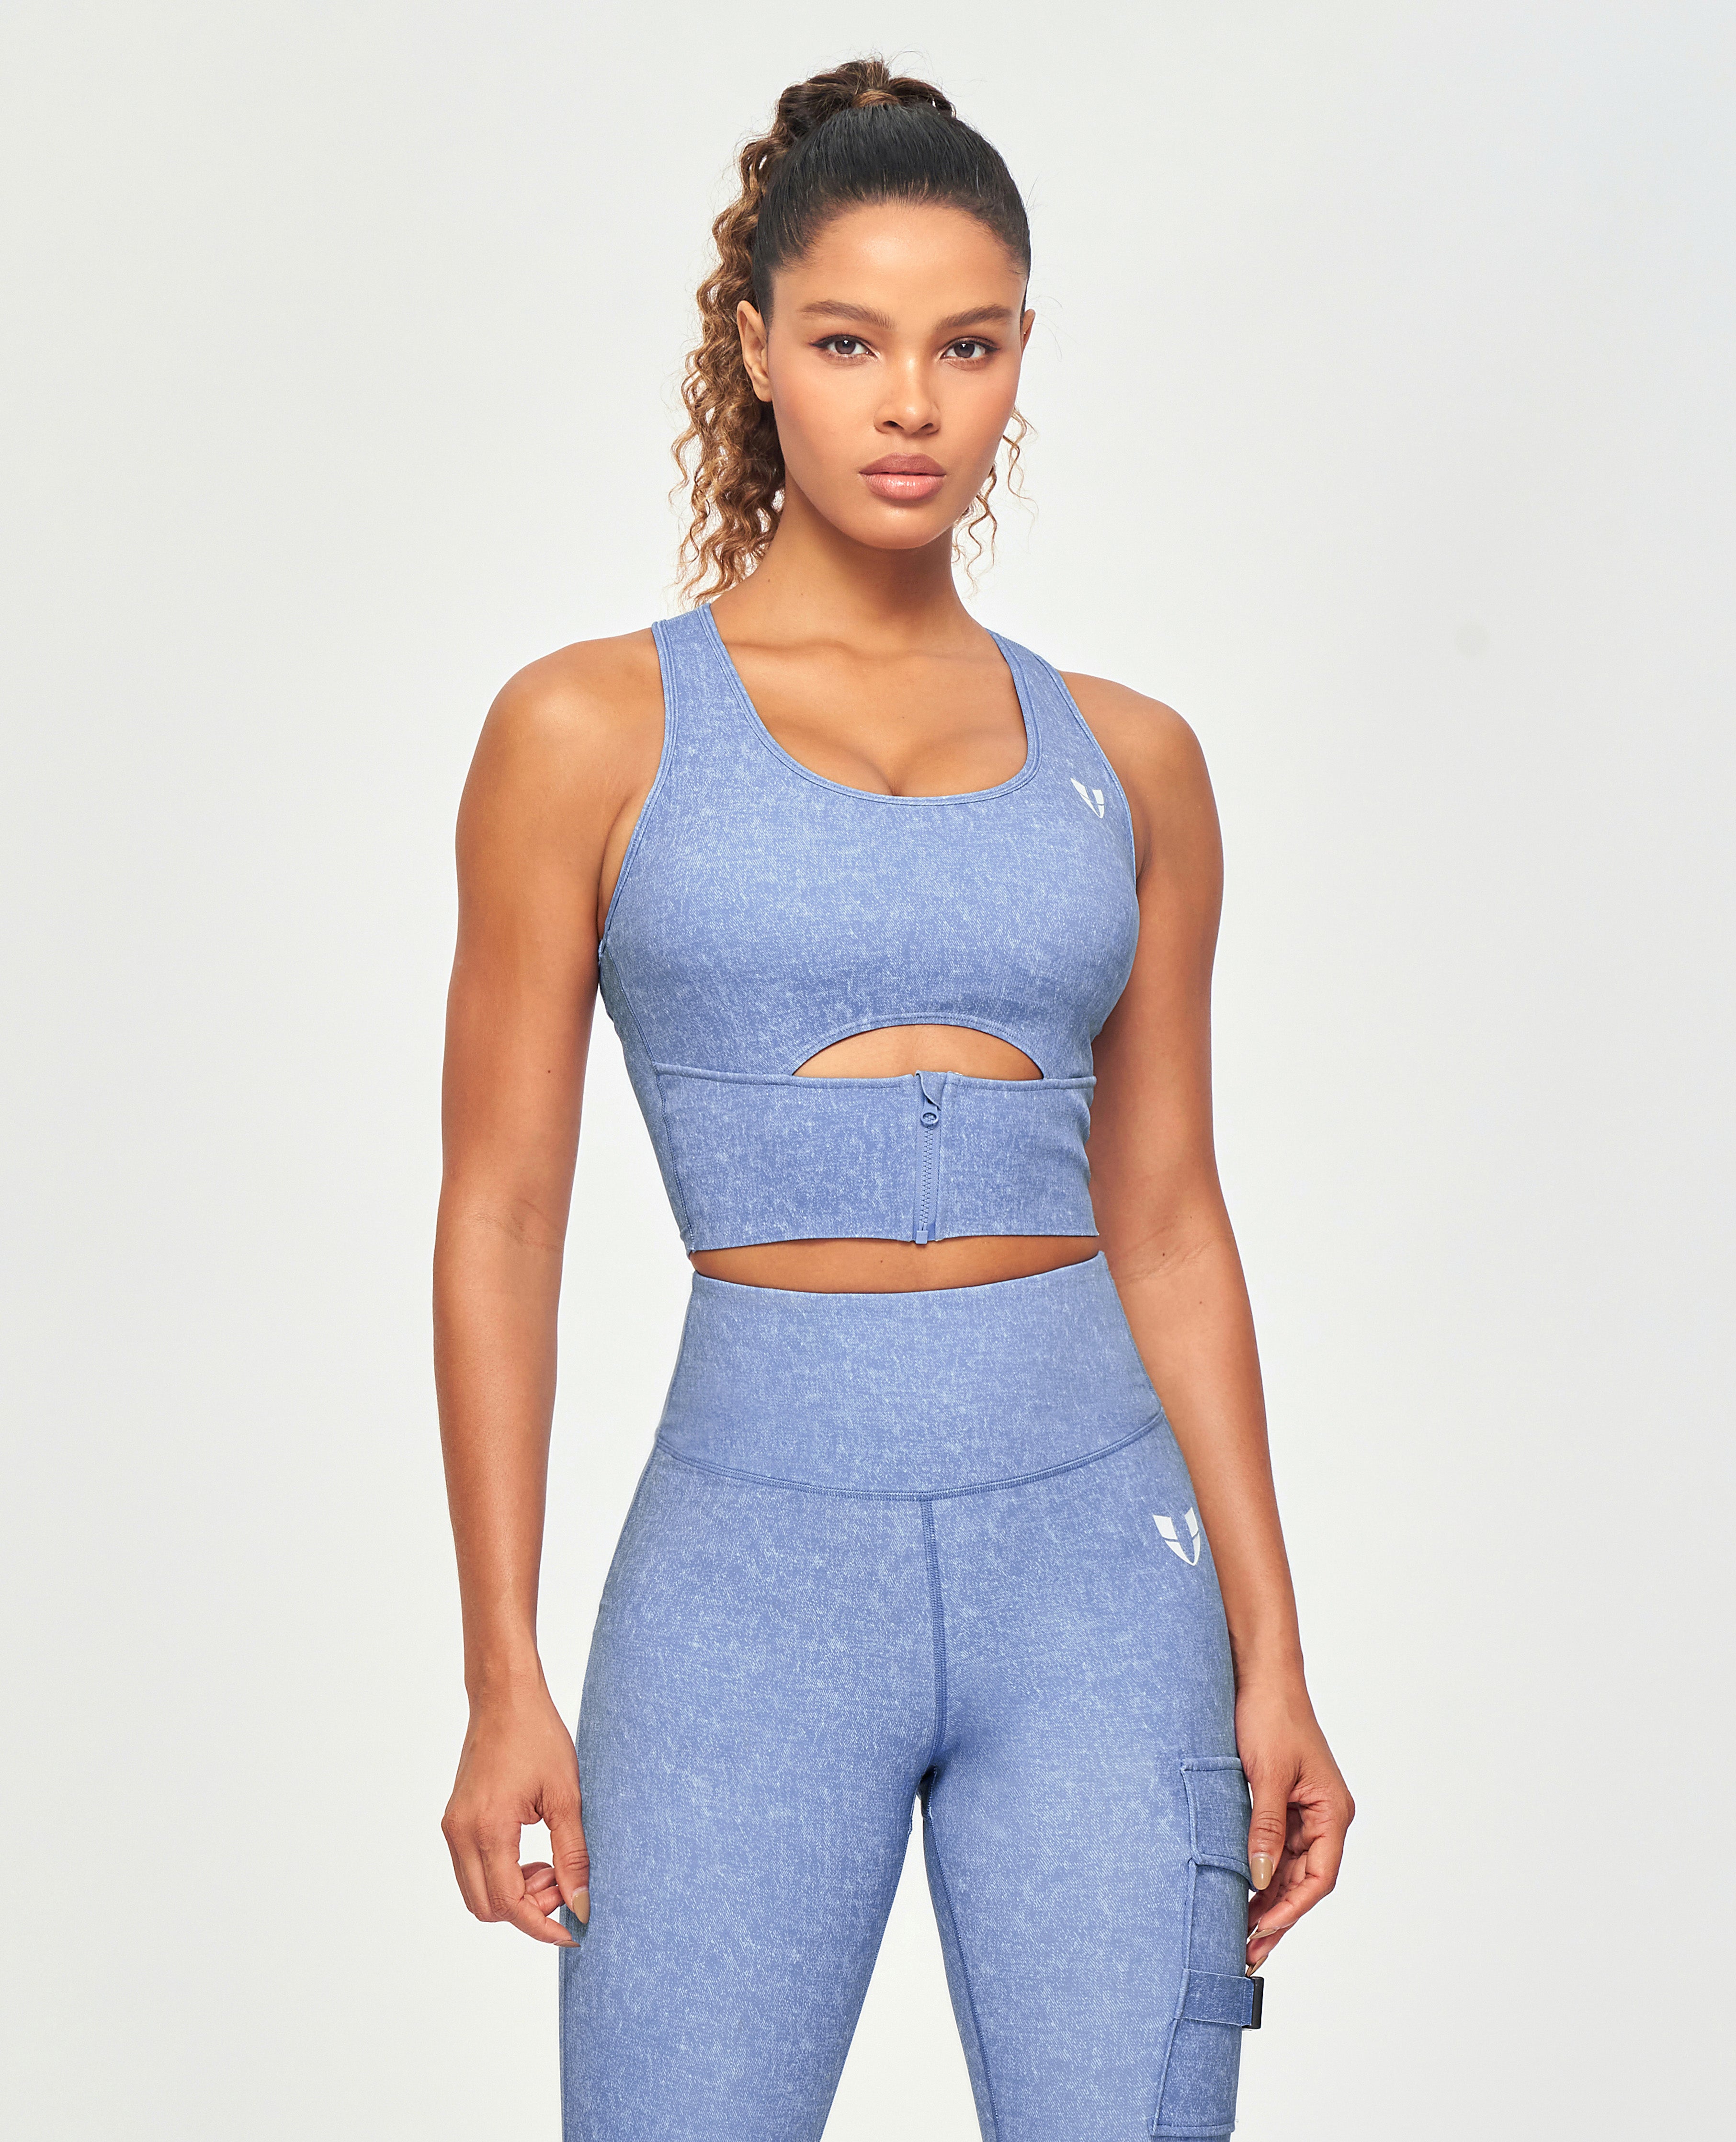 Firming & Covered Sports Bra Almond Shop Now